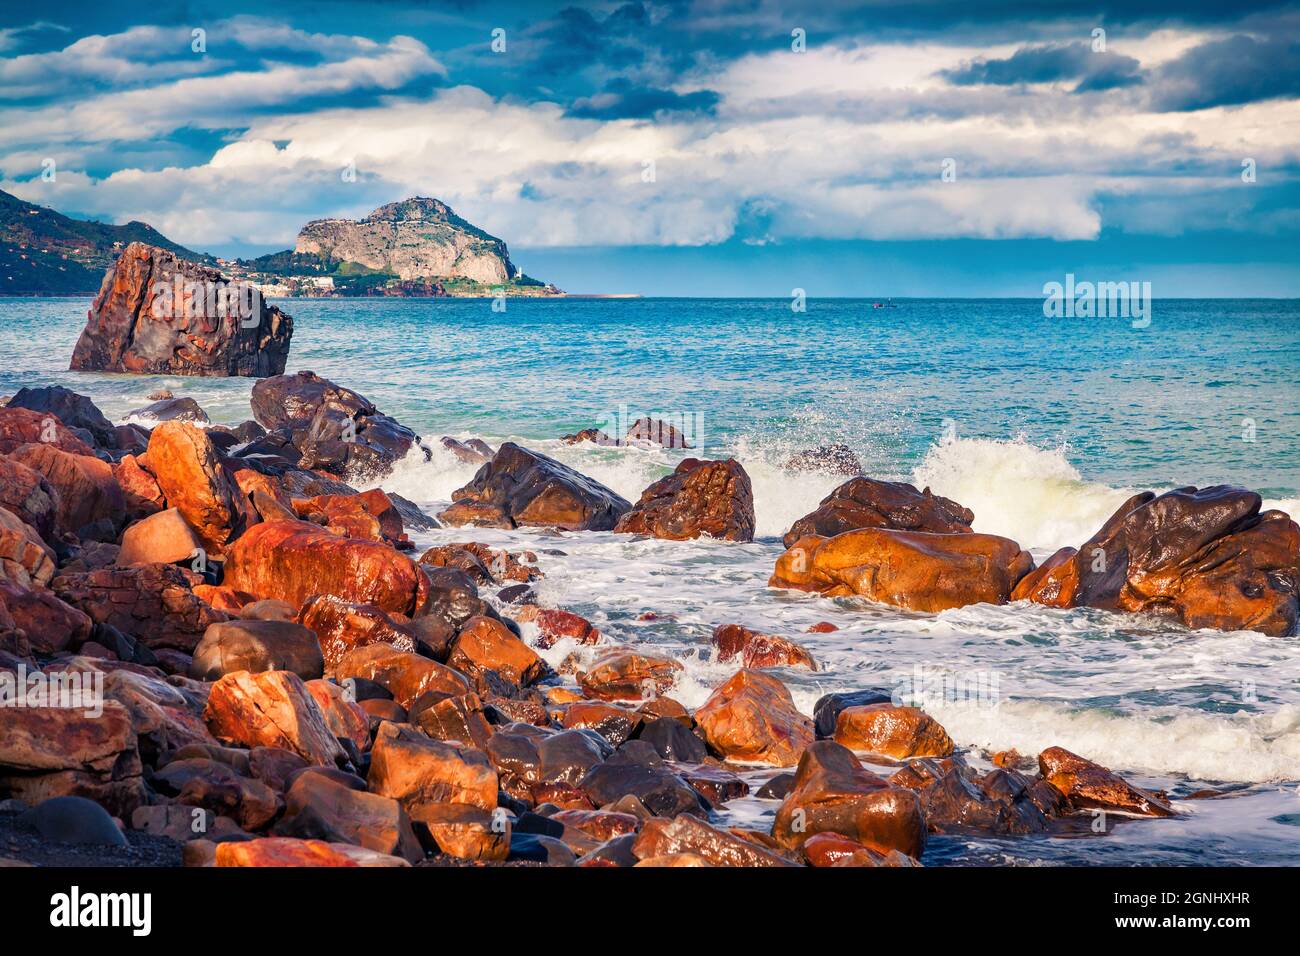 Awesome evevivg scene of Rais Gerbi cape. Picturesque seascape of Mediterranean sea. View of the Celalu cape, Sicily, Italy, Europe. Gloomy summer vie Stock Photo